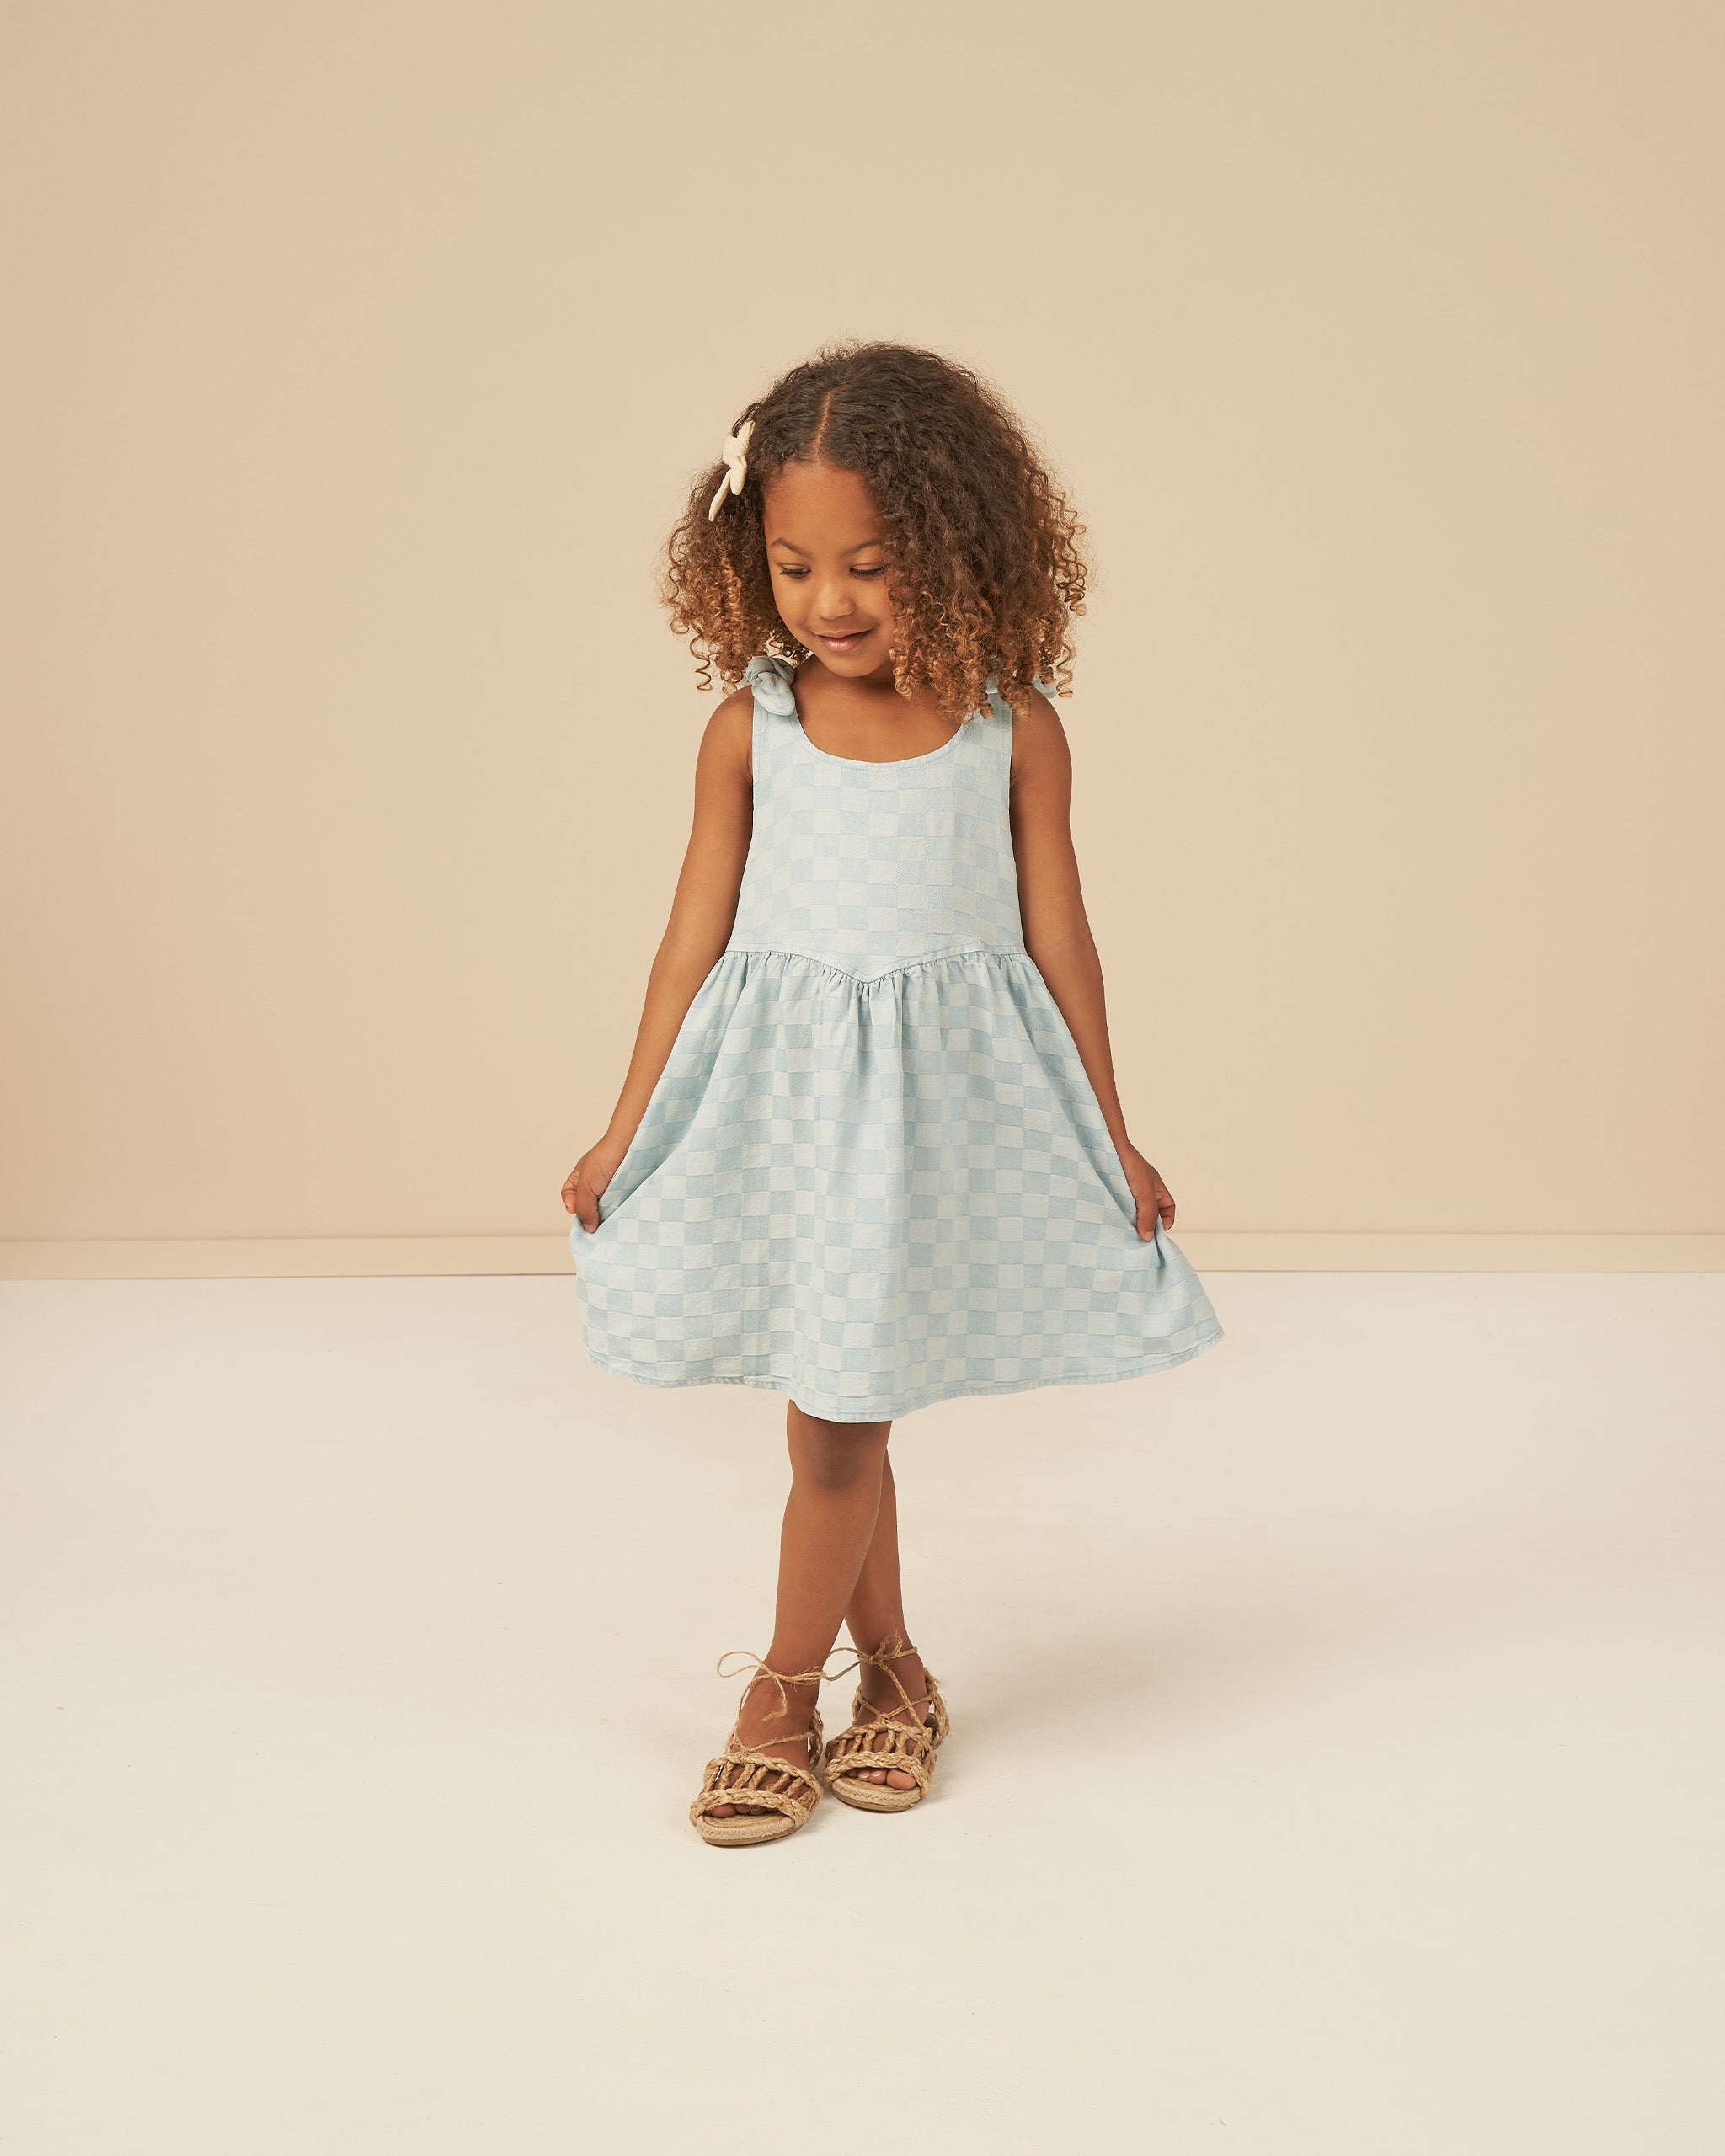 Summer Dress || Blue Check - Rylee + Cru | Kids Clothes | Trendy Baby Clothes | Modern Infant Outfits |